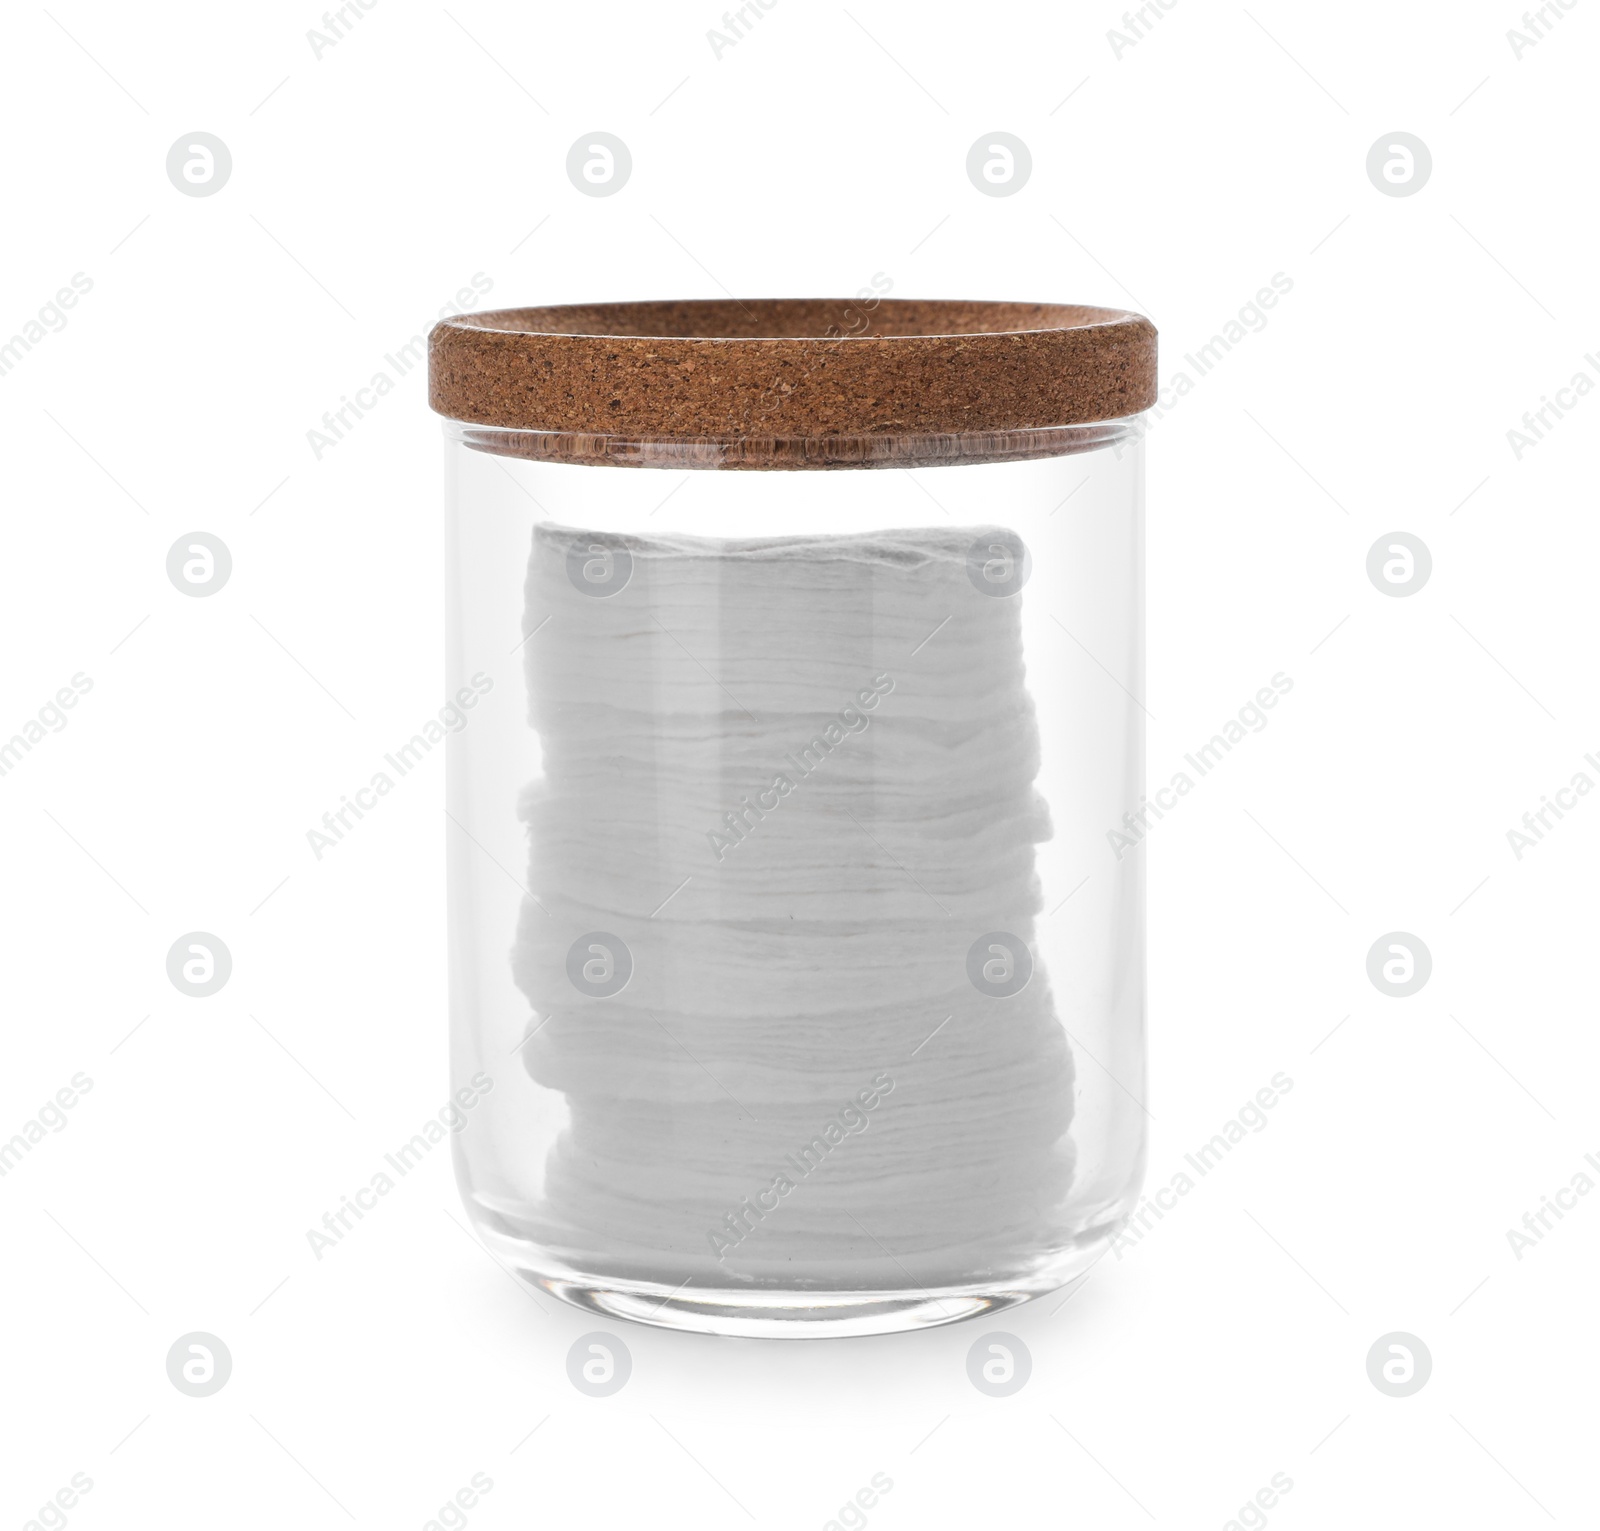 Photo of Cotton pads in glass jar on white background